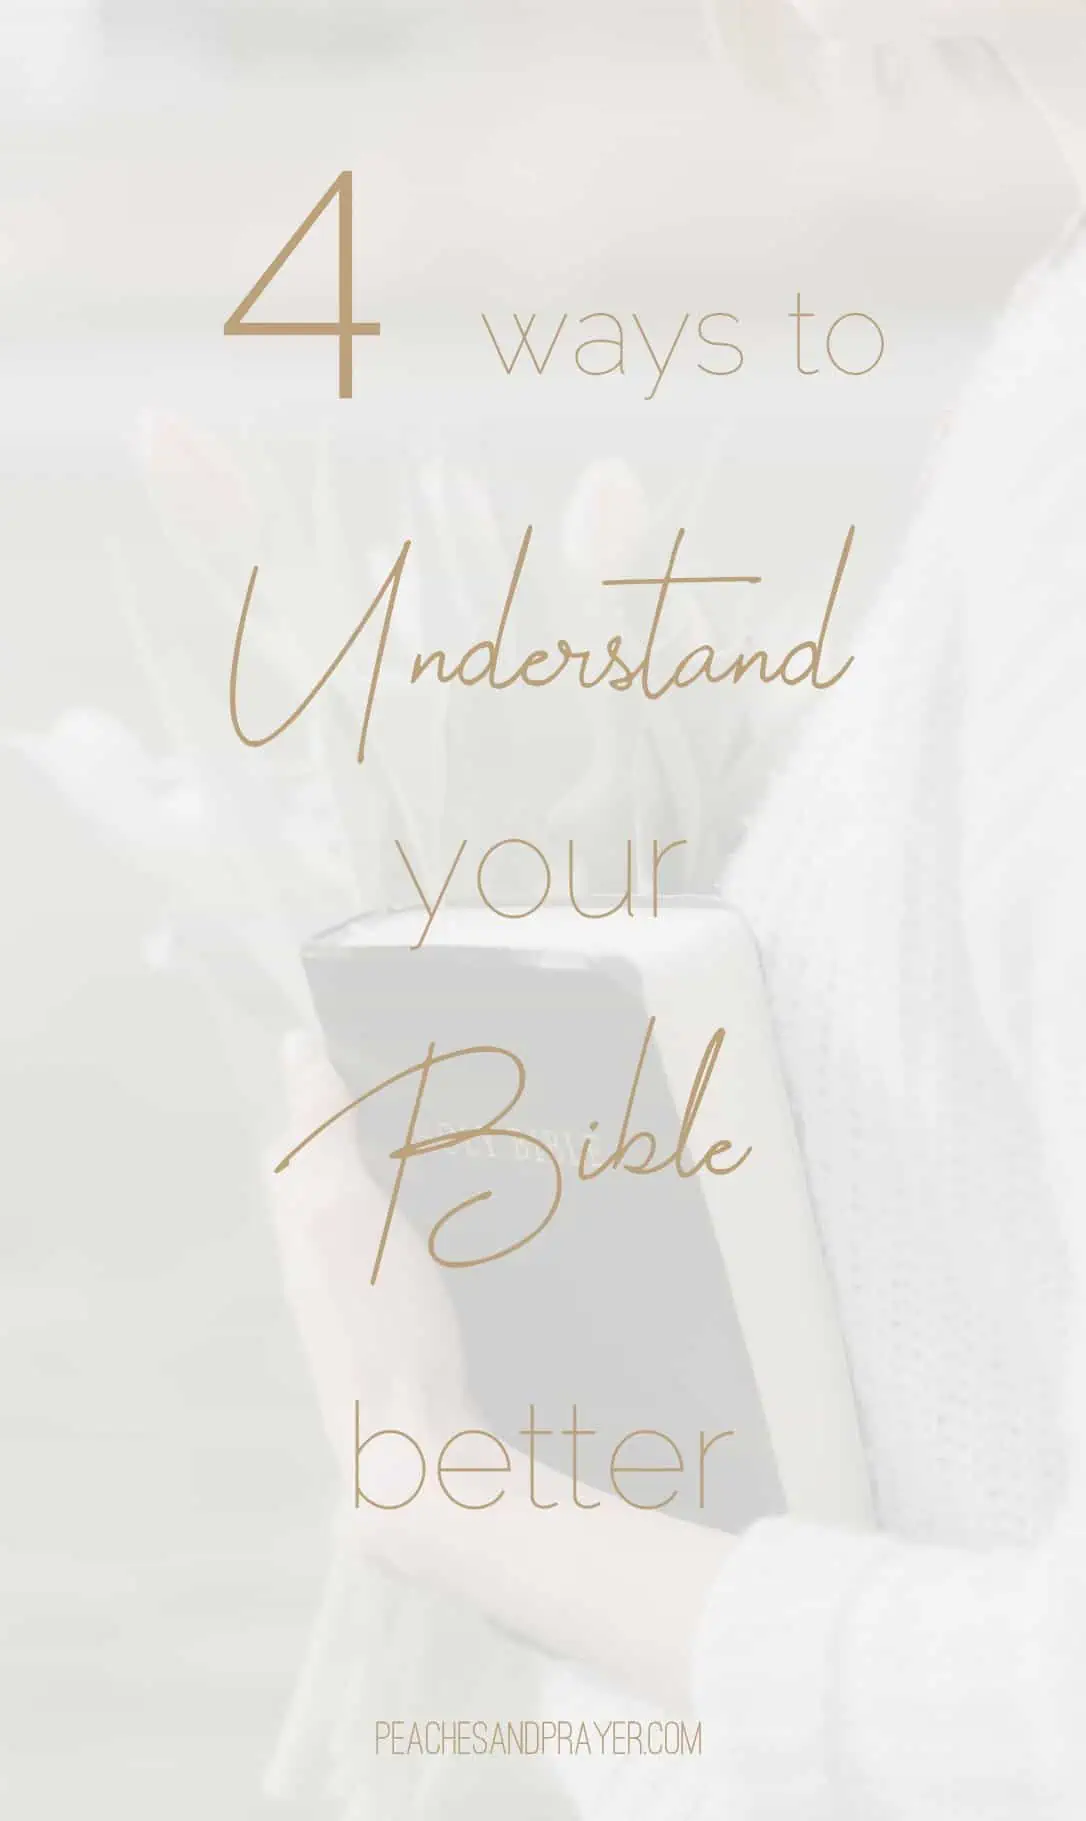 4 Tips to Understand Your Bible Better